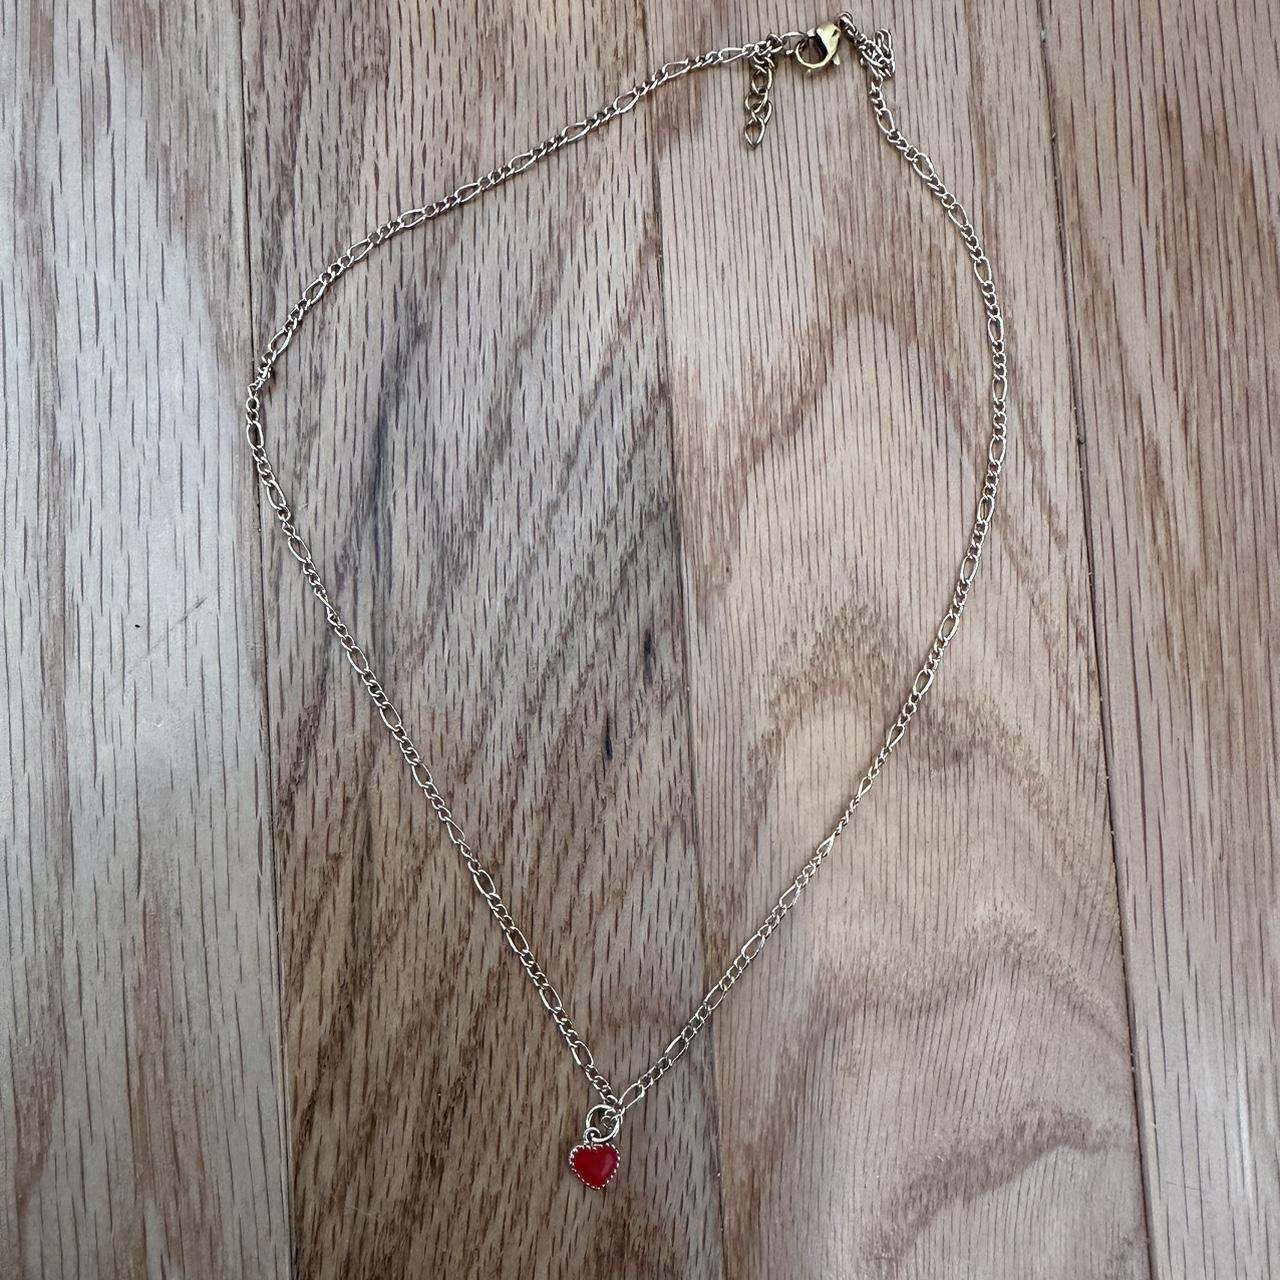 Brandy Melville Gold Heart Necklace - $14 - From tia